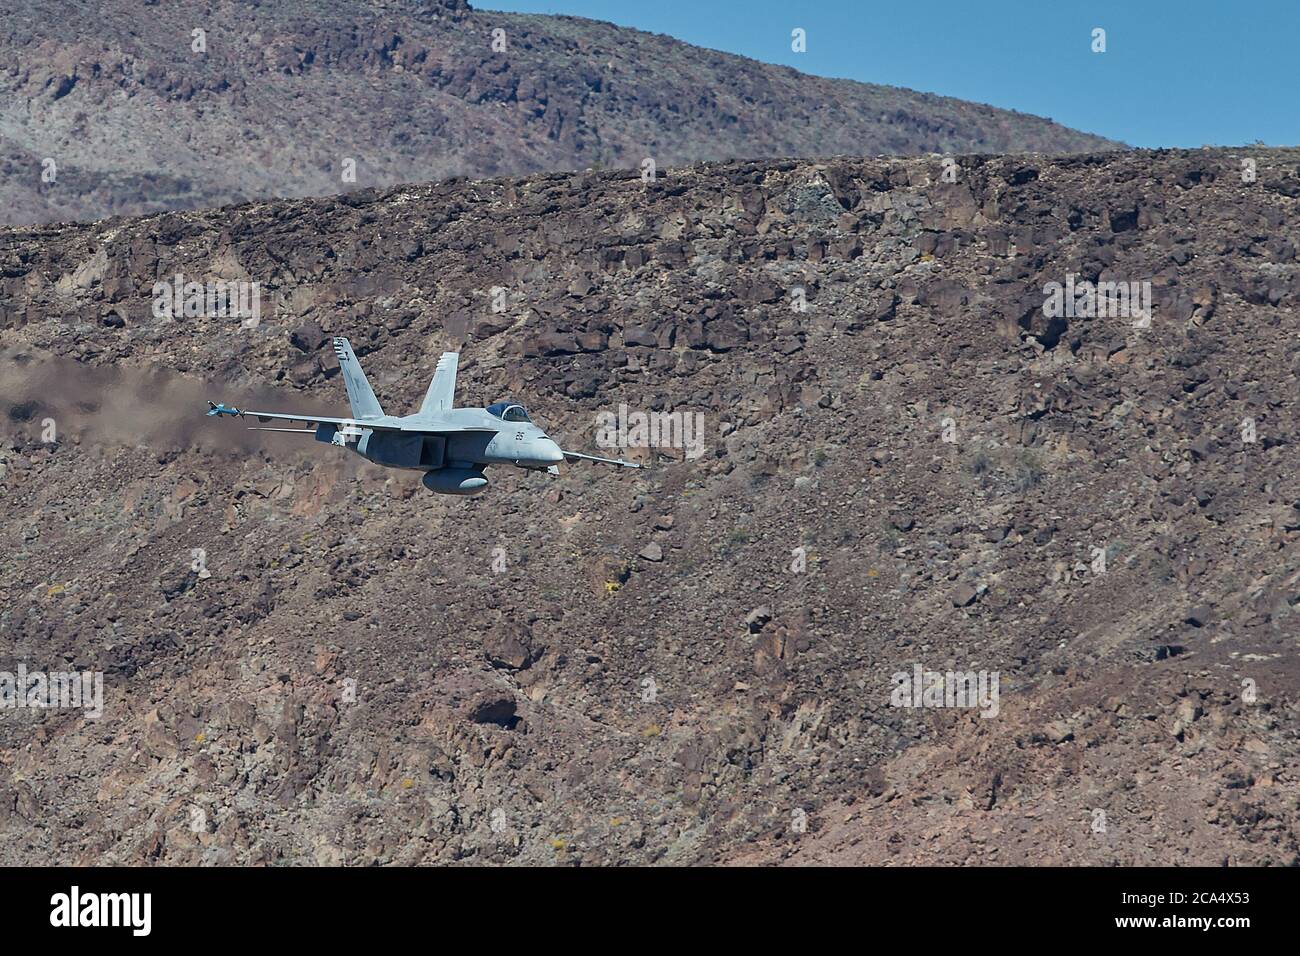 United States Navy F/A-18E  Super Hornet Fighter Jet, Flying At High Speed And Low Level. Through A Desert Canyon. Stock Photo